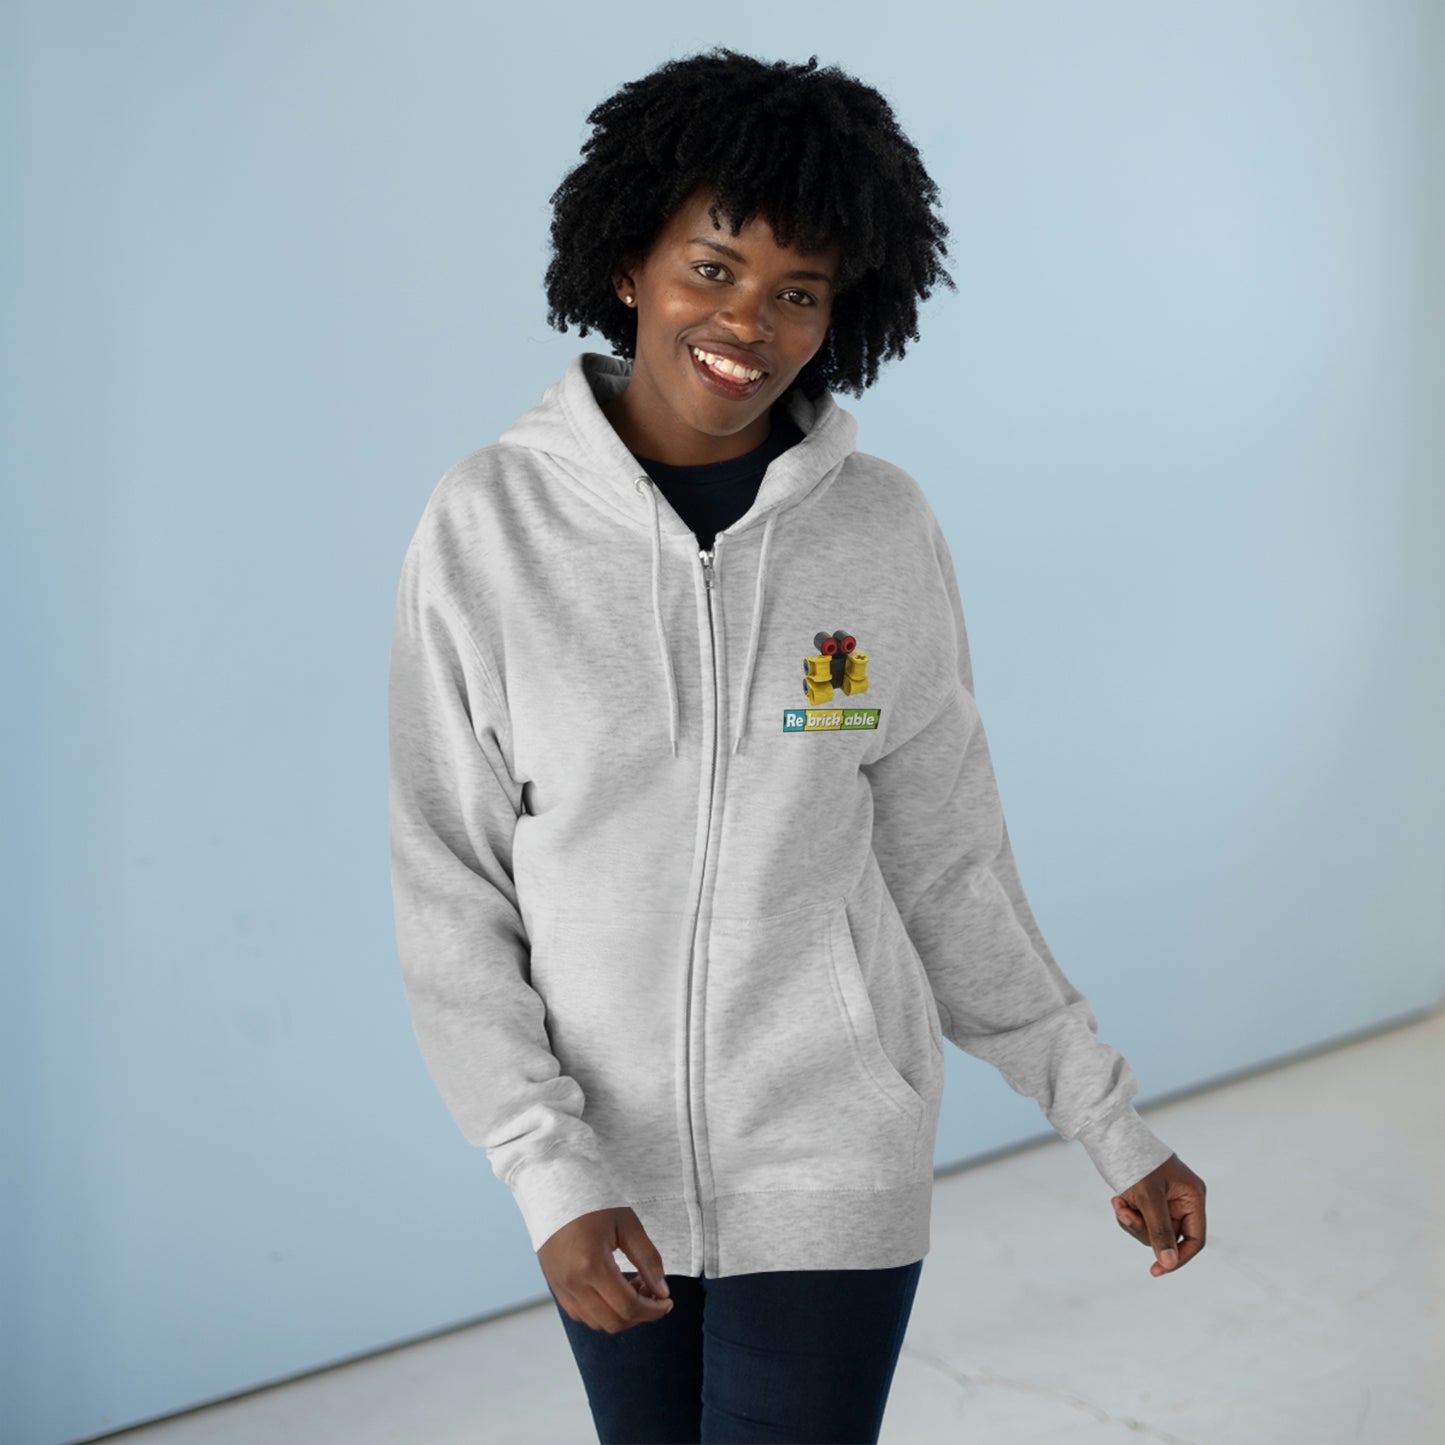 Unisex Premium Full Zip Hoodie (small front logo, shipped from US)